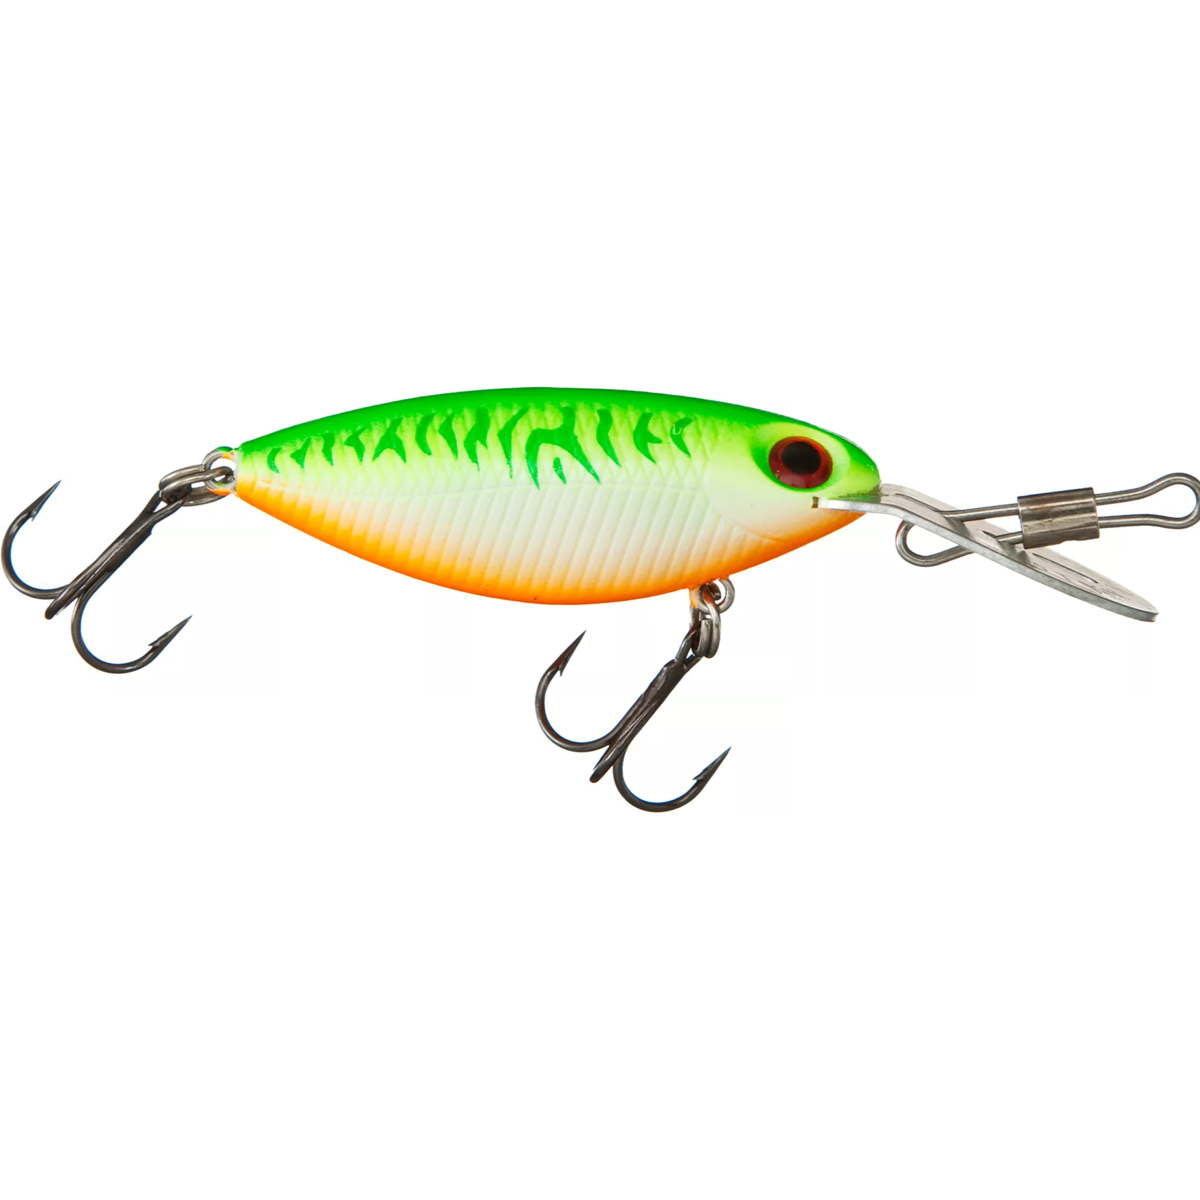 Photo of Storm Hot 'N Tot Madflash for sale at United Tackle Shops.